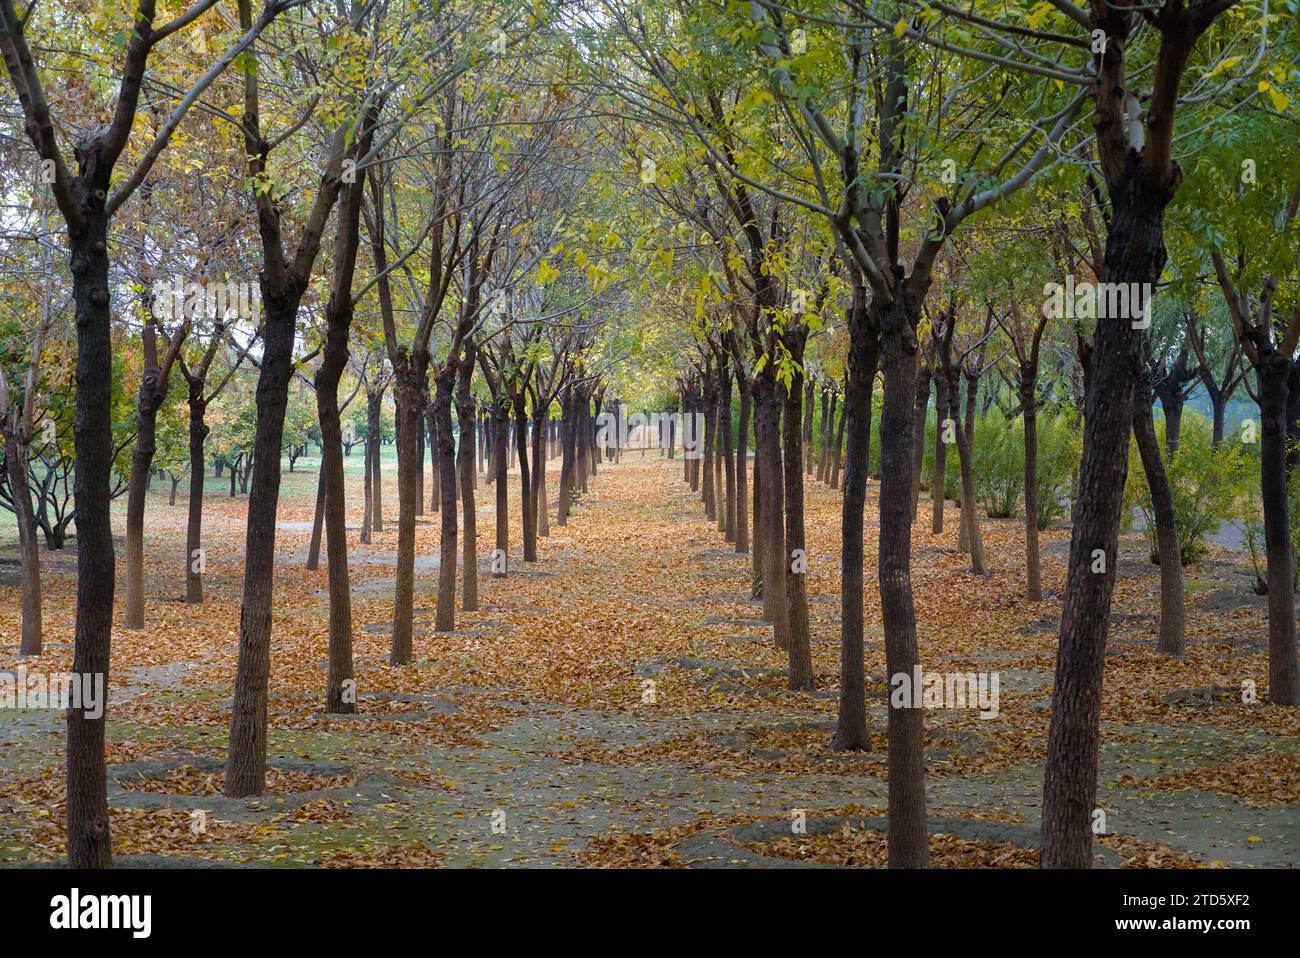 Rows of trees with yellow leaves falling ground after the rain in the fall. Stock Photo